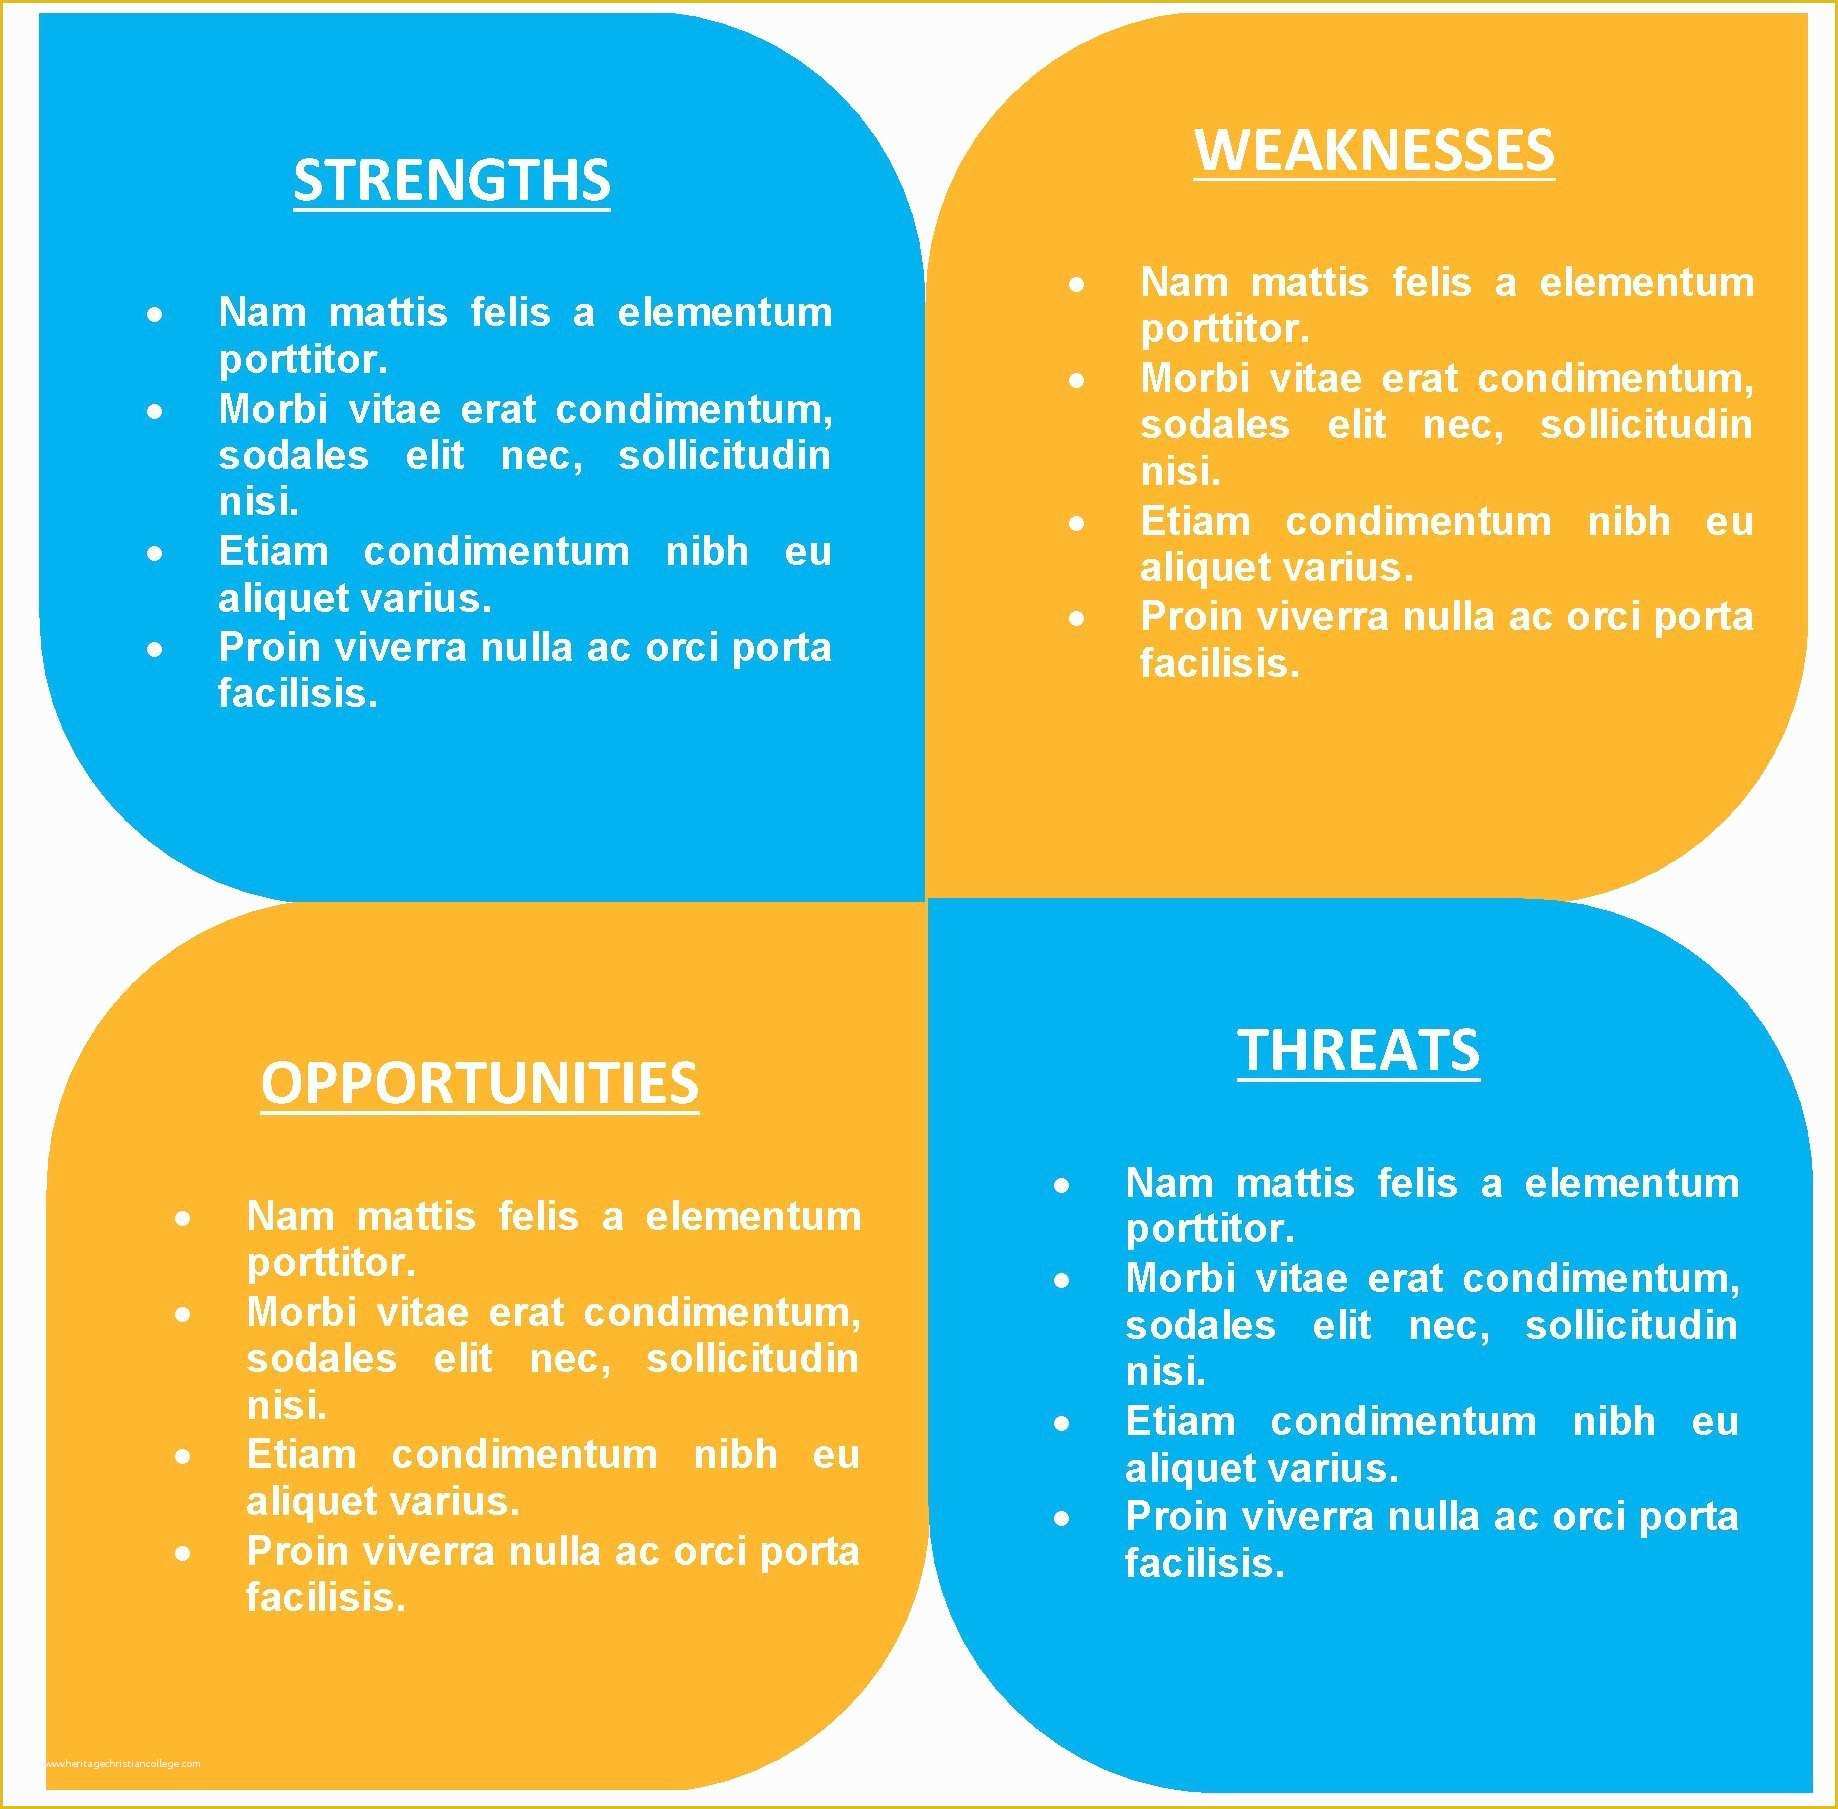 Free Swot Chart Template Of 40 Free Swot Analysis Templates In Word